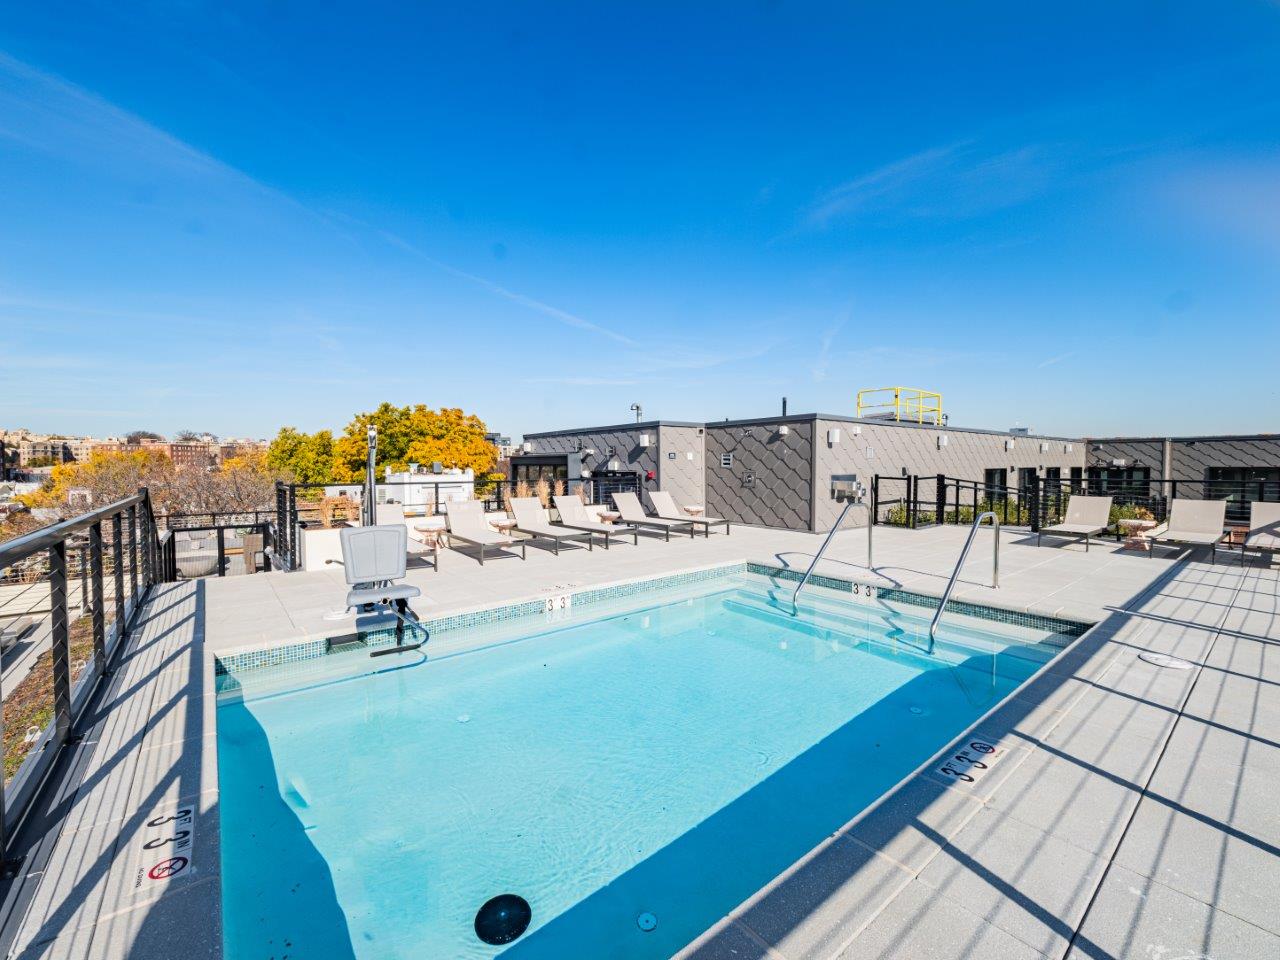 Capitol Rose Luxury Apartments in Washington, DC Rooftop Patio and Pool with Views